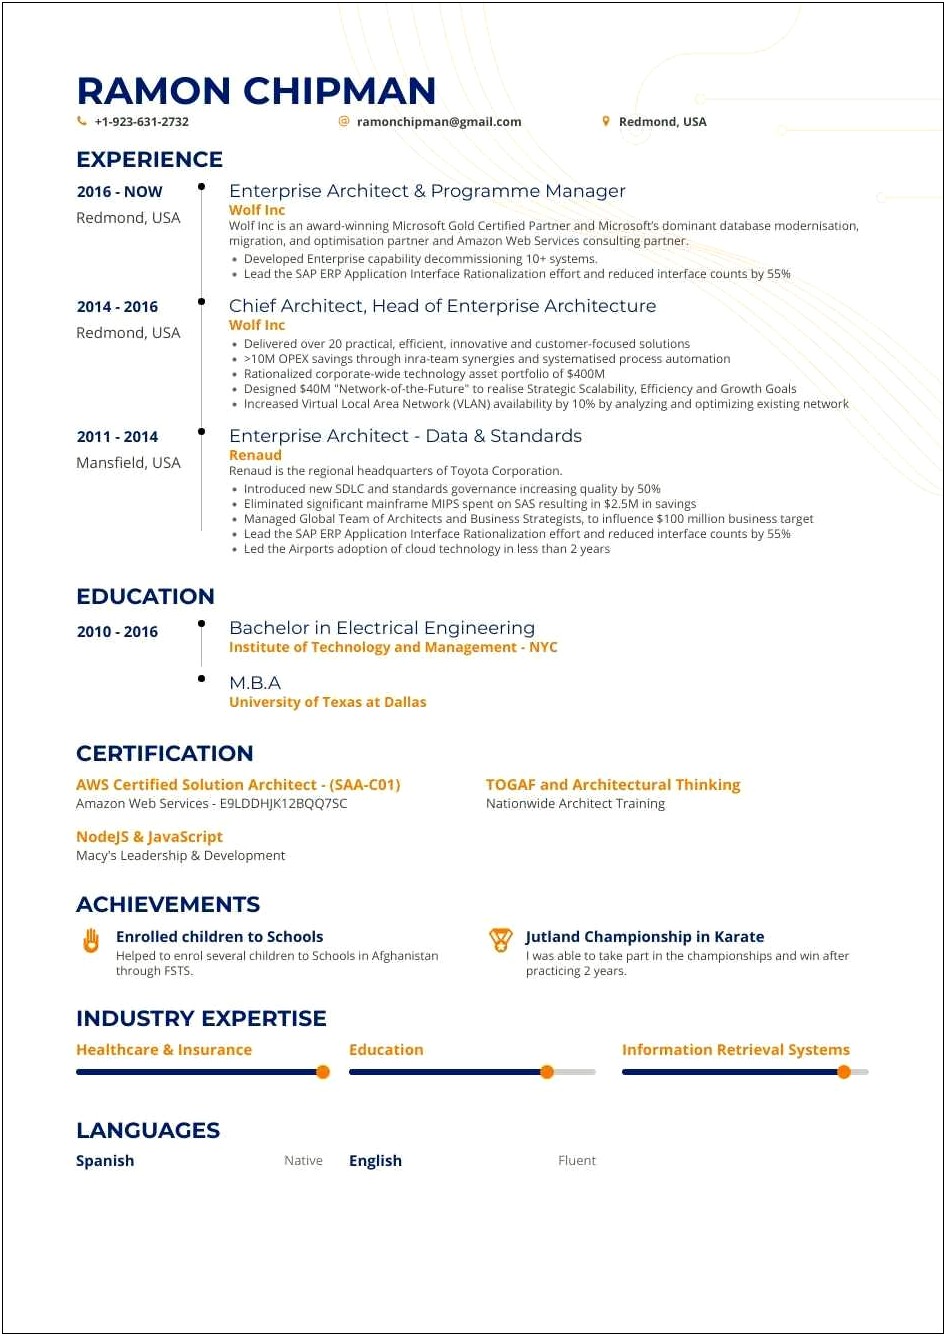 Sample Resume For 3 Years Experience In Mainframe